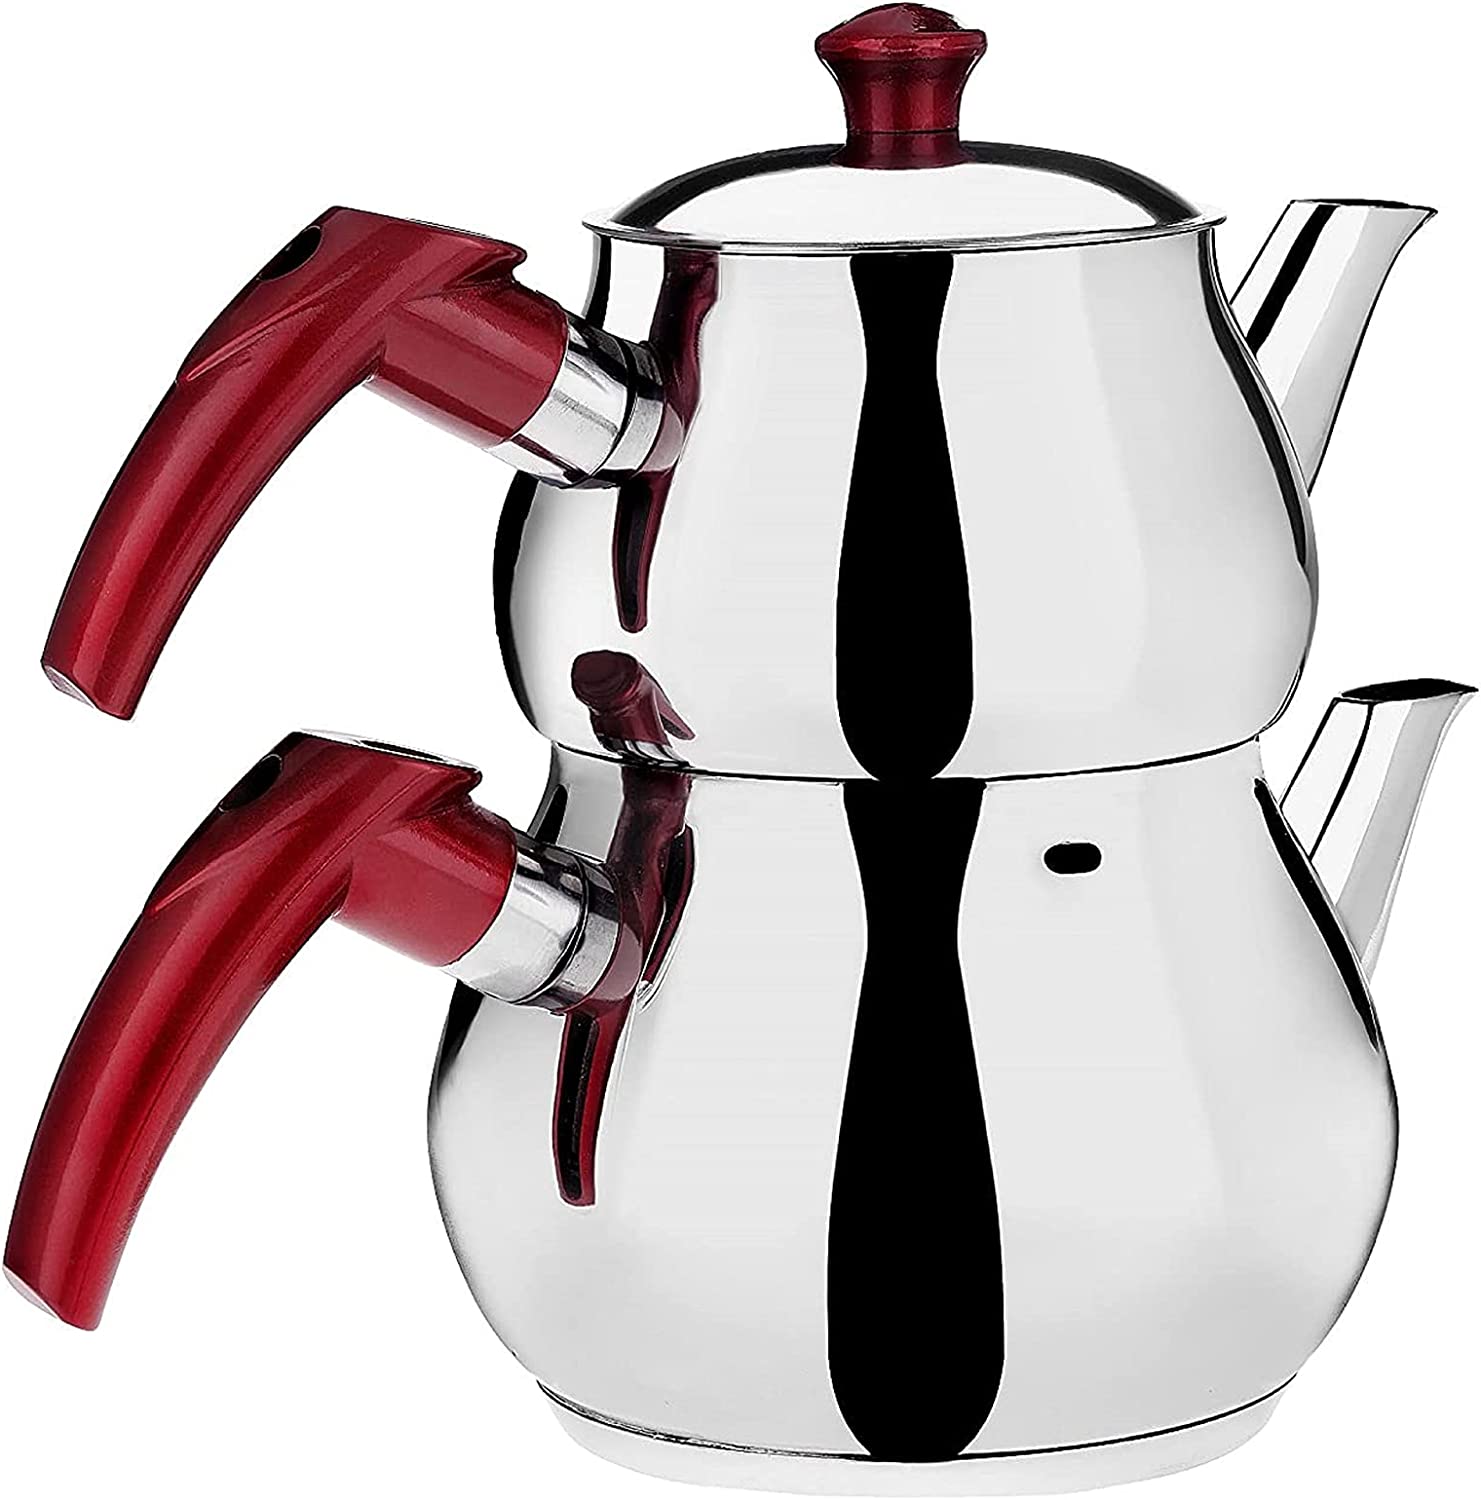 Destalya Turkish Teapot Set, Stainless Steel Double Teapots for Stove, Top Tea Maker with Handle, Samowar Style, Self-Stressed Teapot Kettle, Water Warmer, Caydanlik (Mini Red)